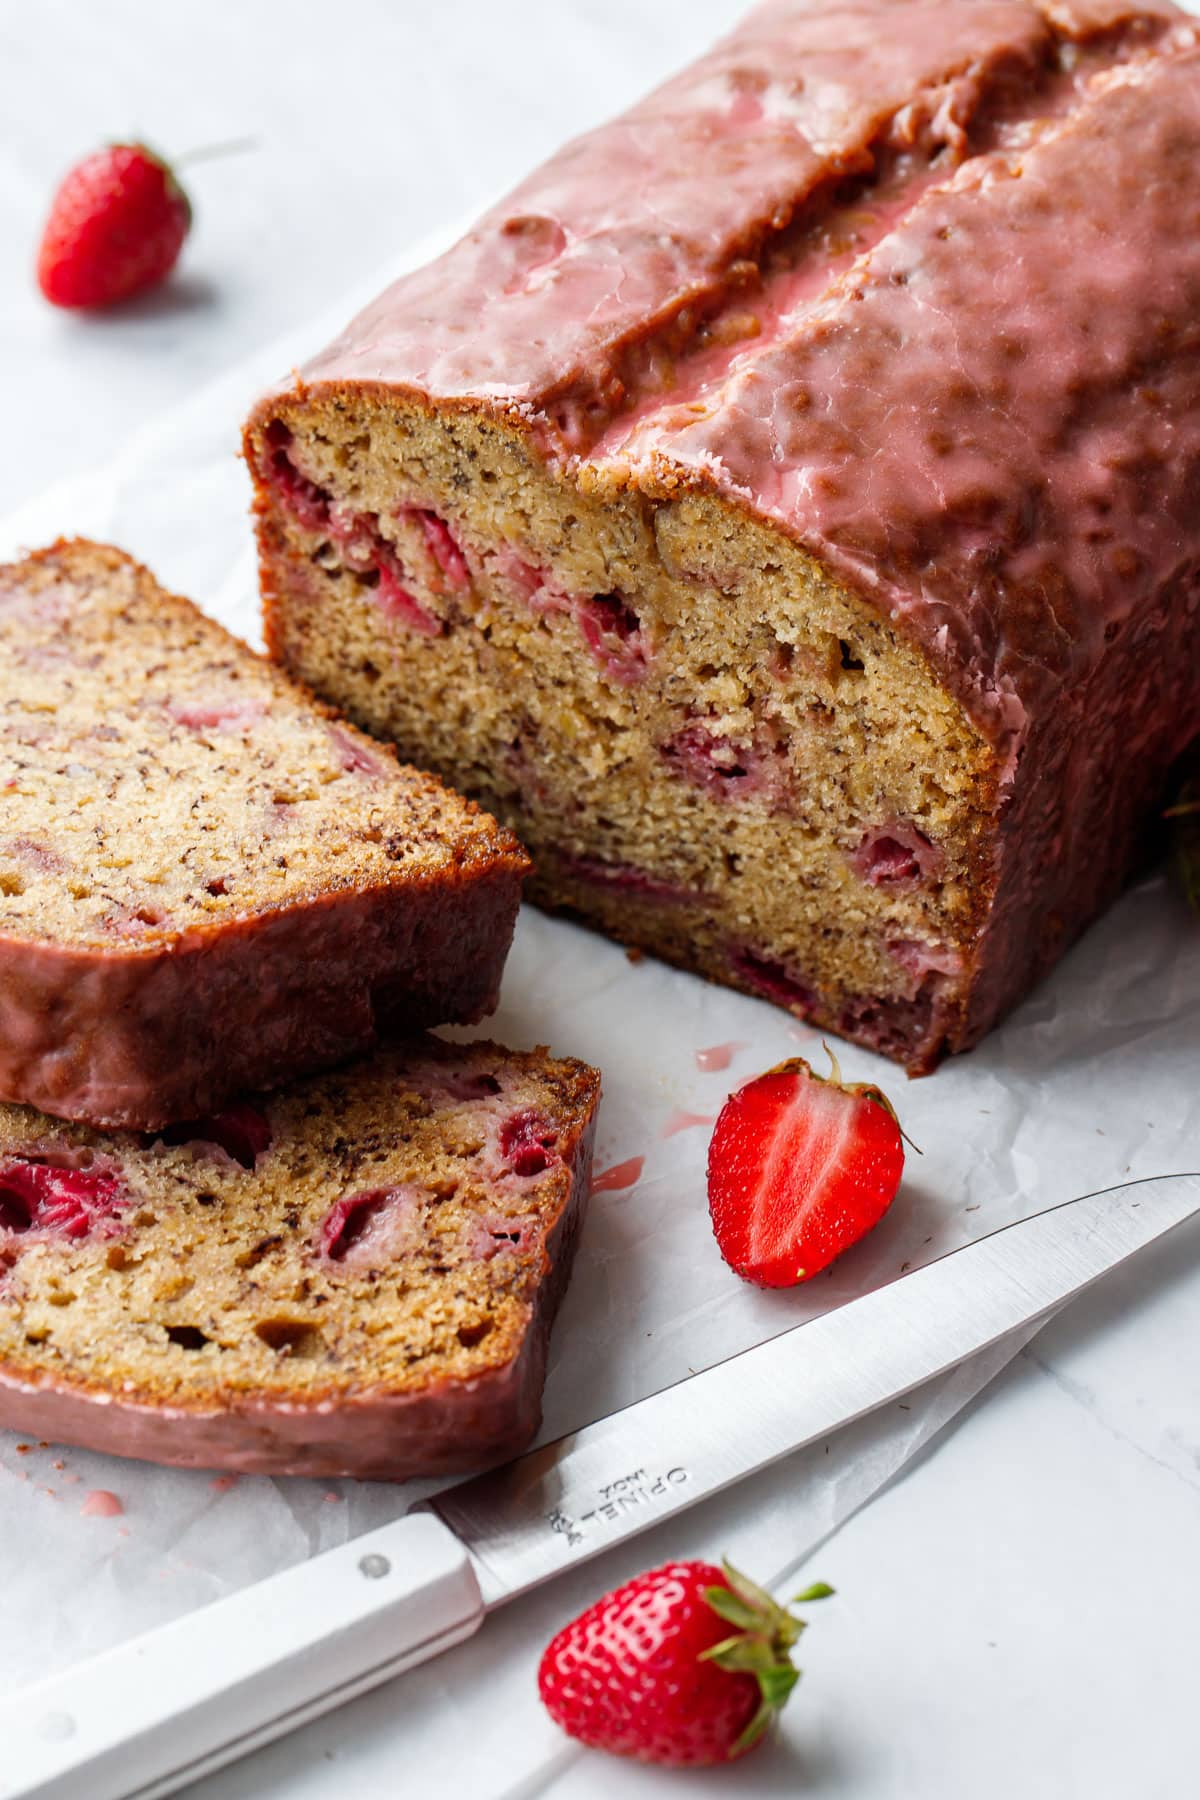 Sliced loaf of Strawberry Banana Bread covered with a pink strawberry glaze, cut section shows the moist texture and pieces of fresh strawberries scattered throughout.